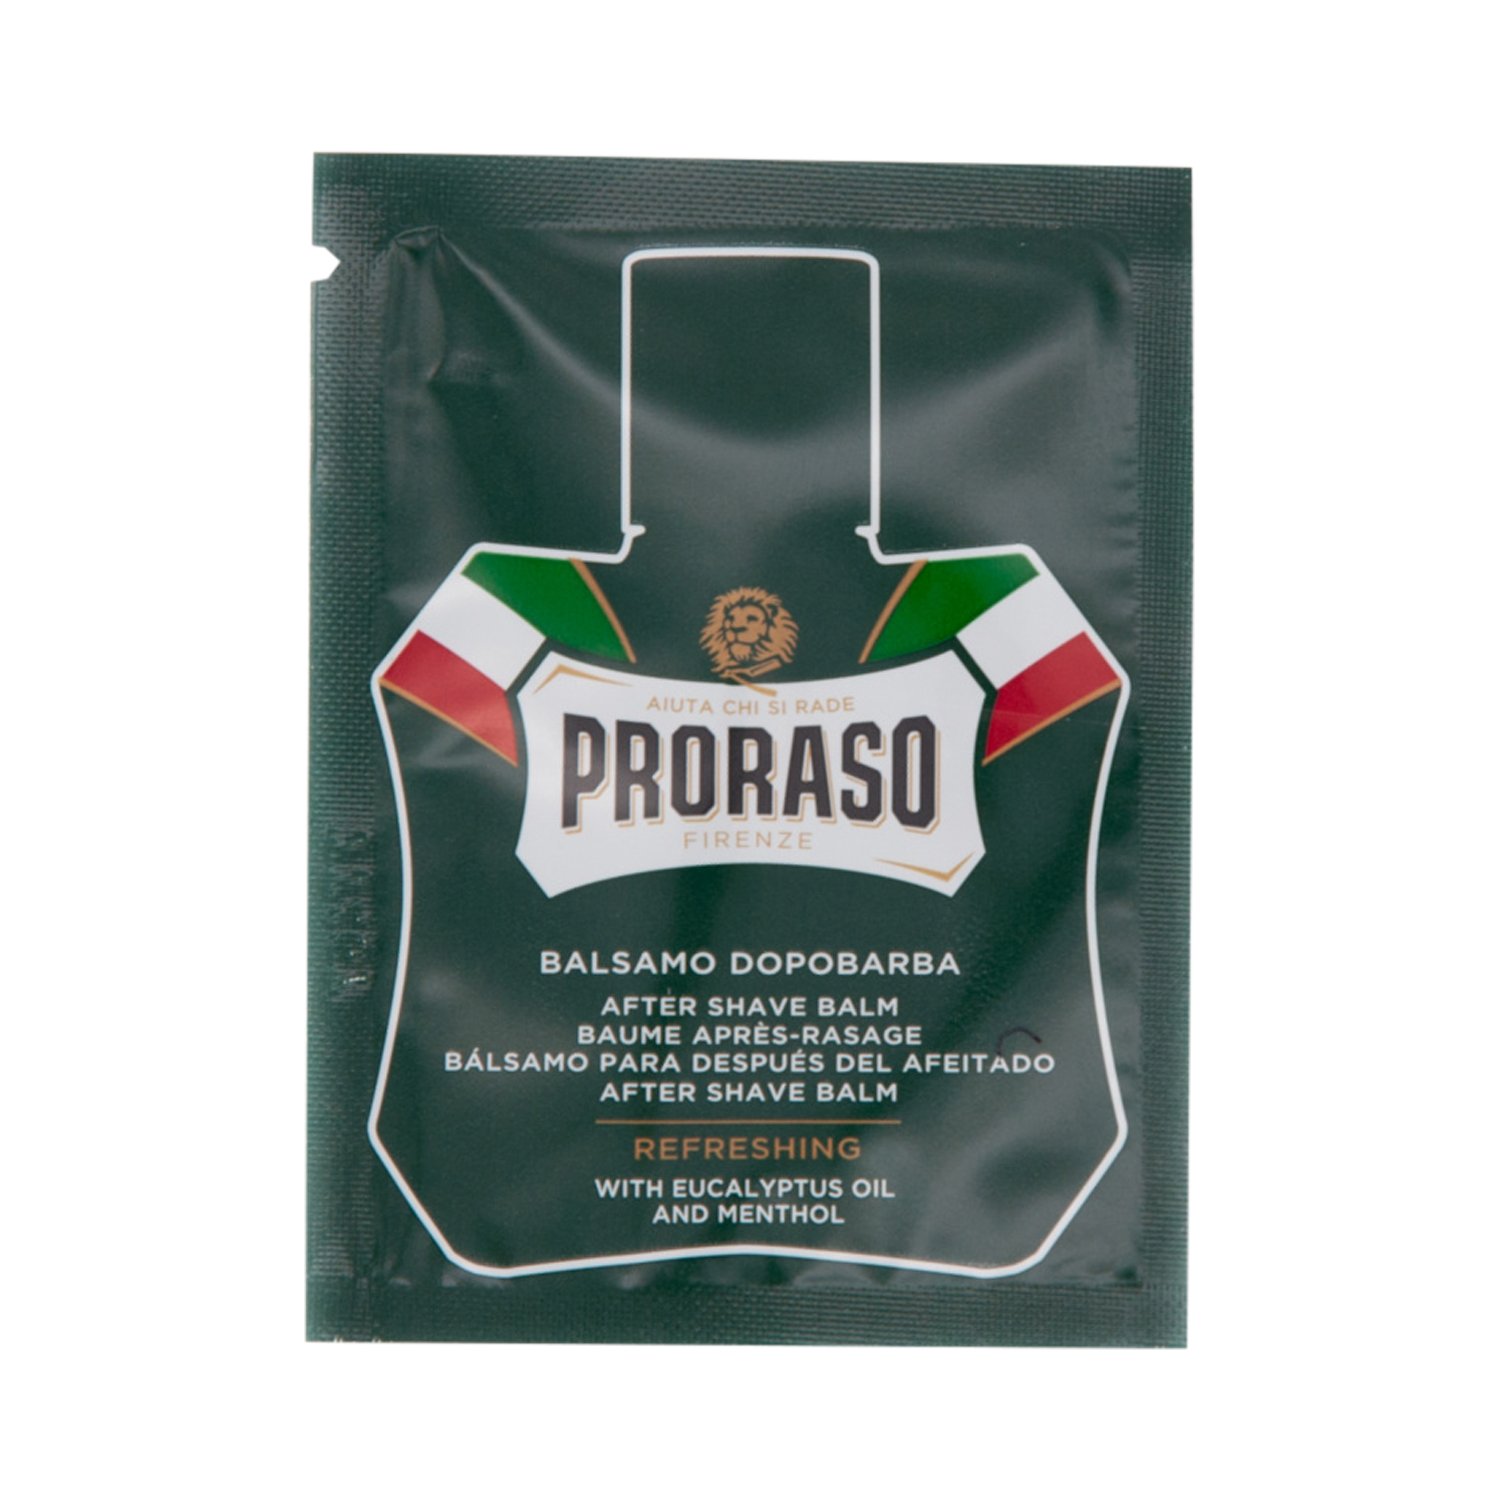 Probe - Proraso - After Shave Balm - GREEN